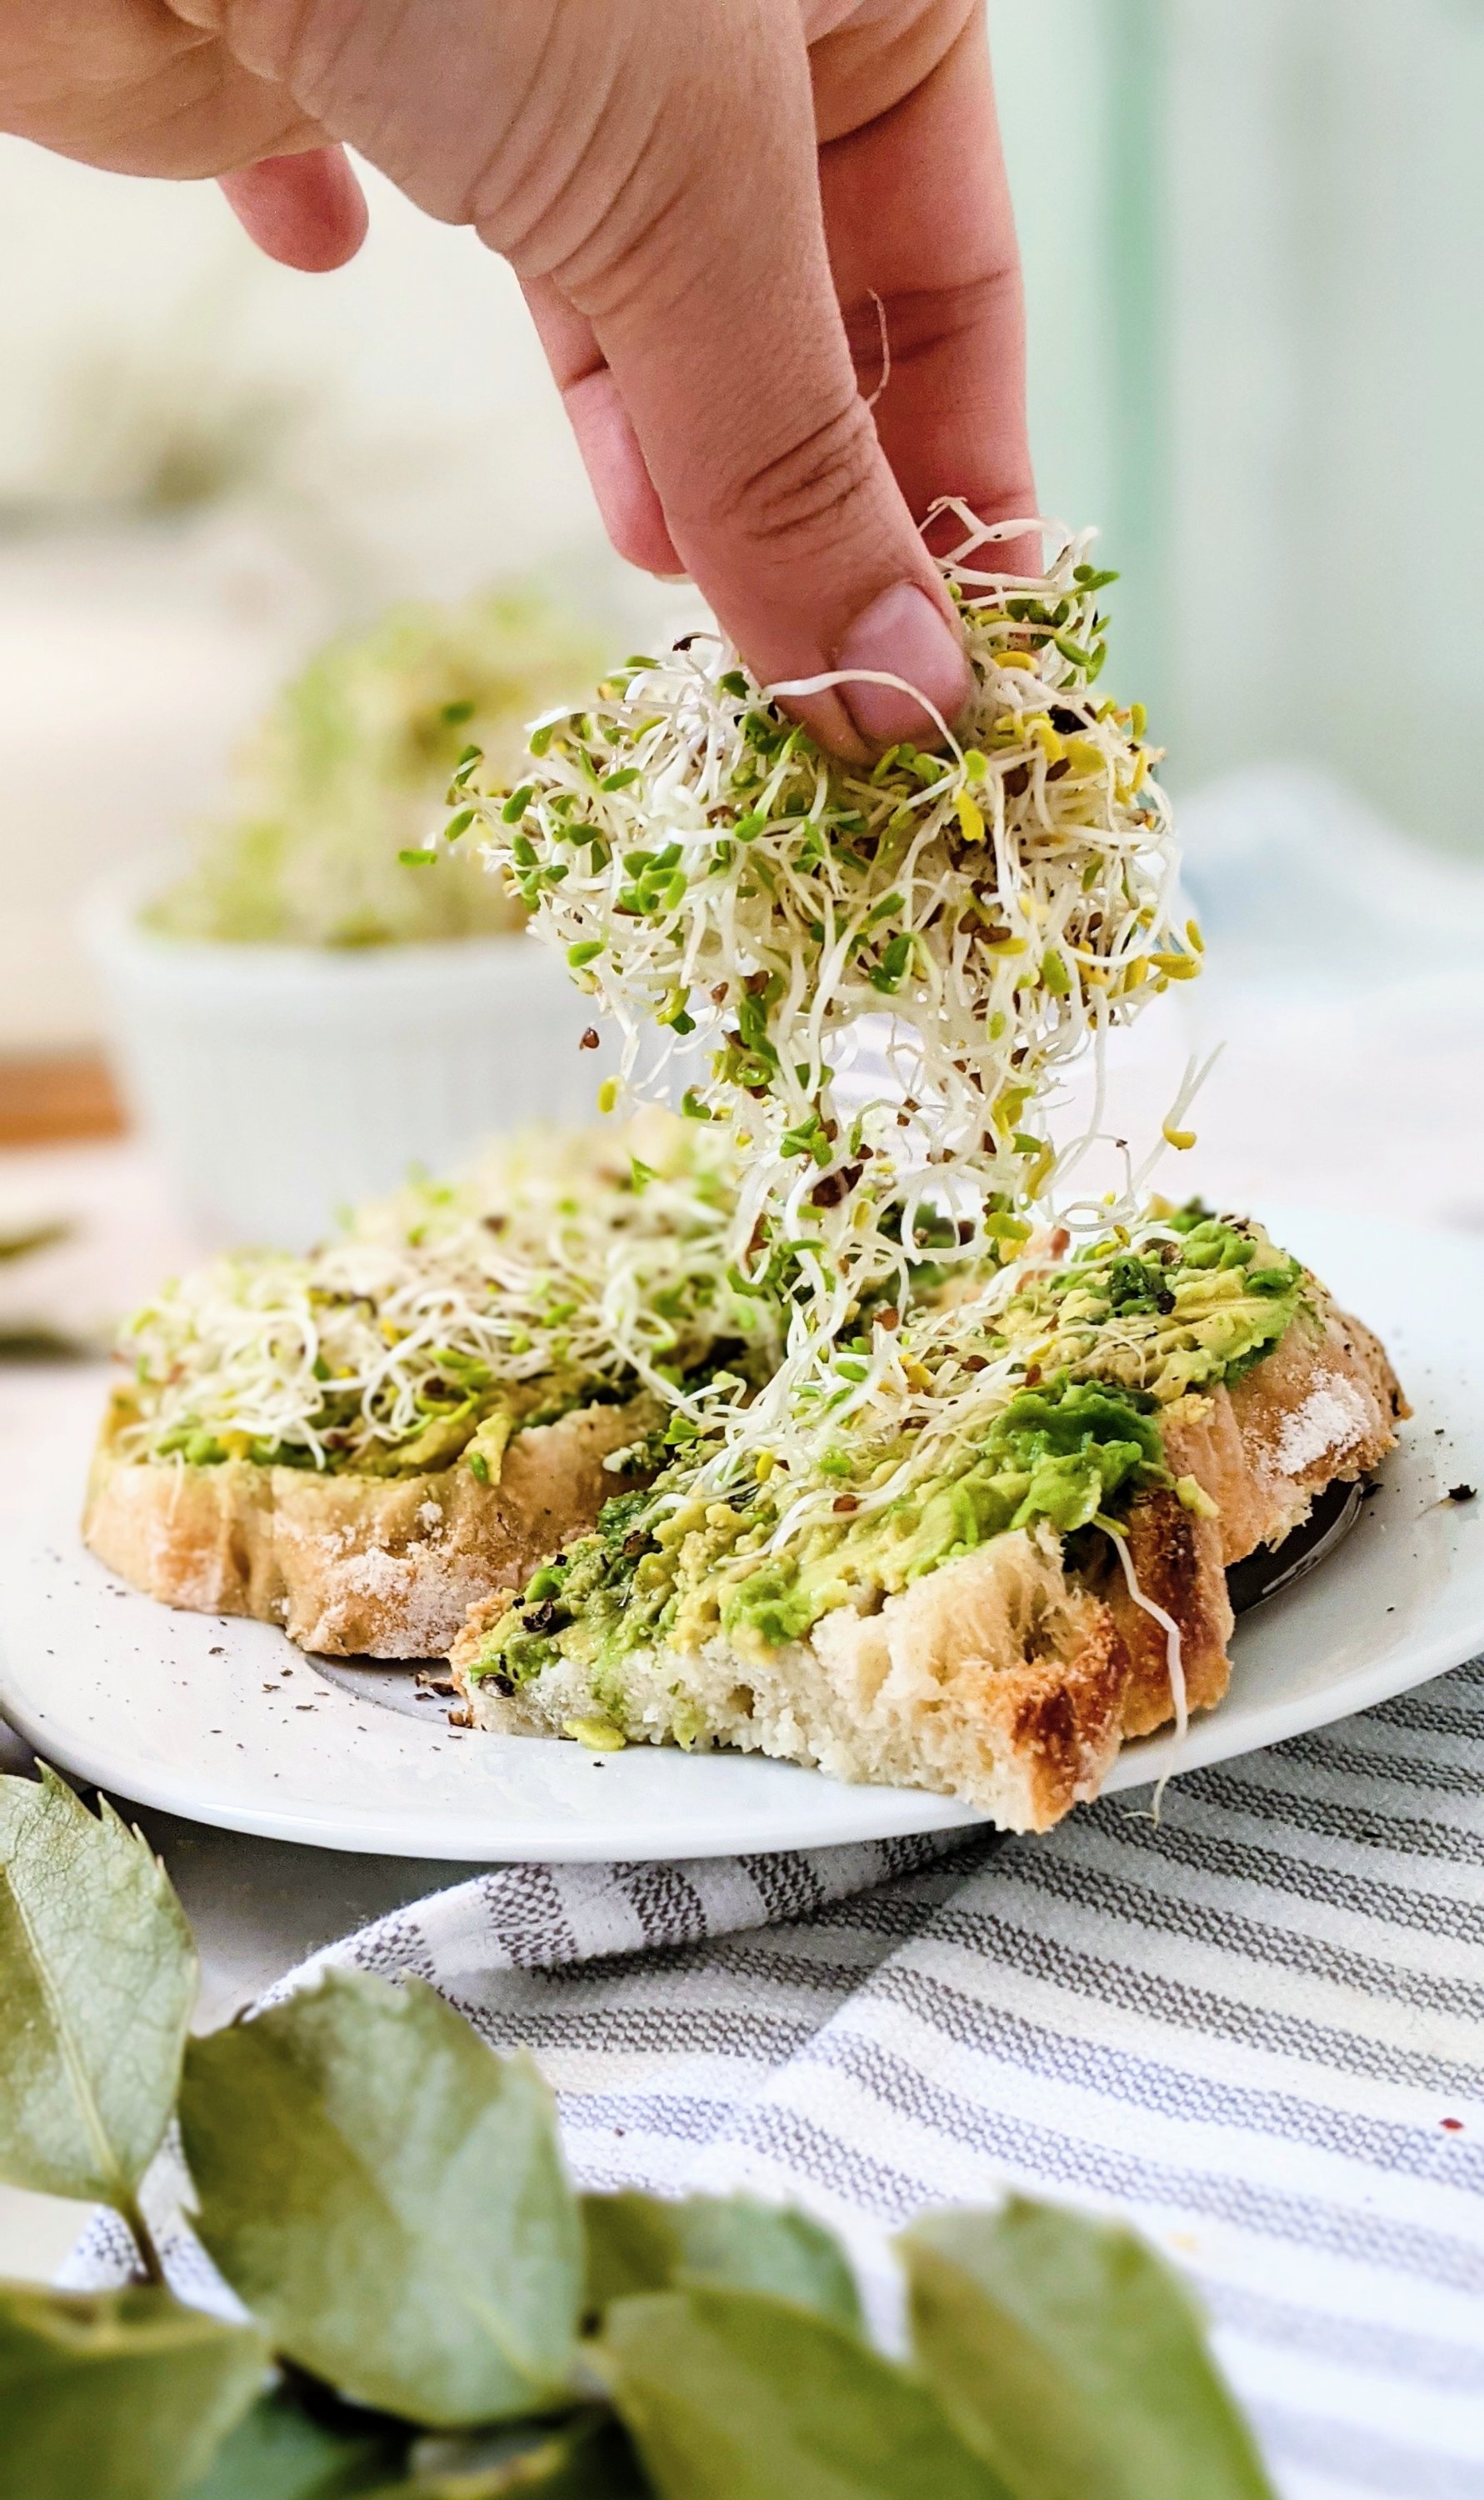 sprouts for breakfast recipe with alfalfa sprouts meal ideas ways to eat sprouts for breakfast brunch or a light lunch recipes with alfalfa sprouts avocado toast with sprouts